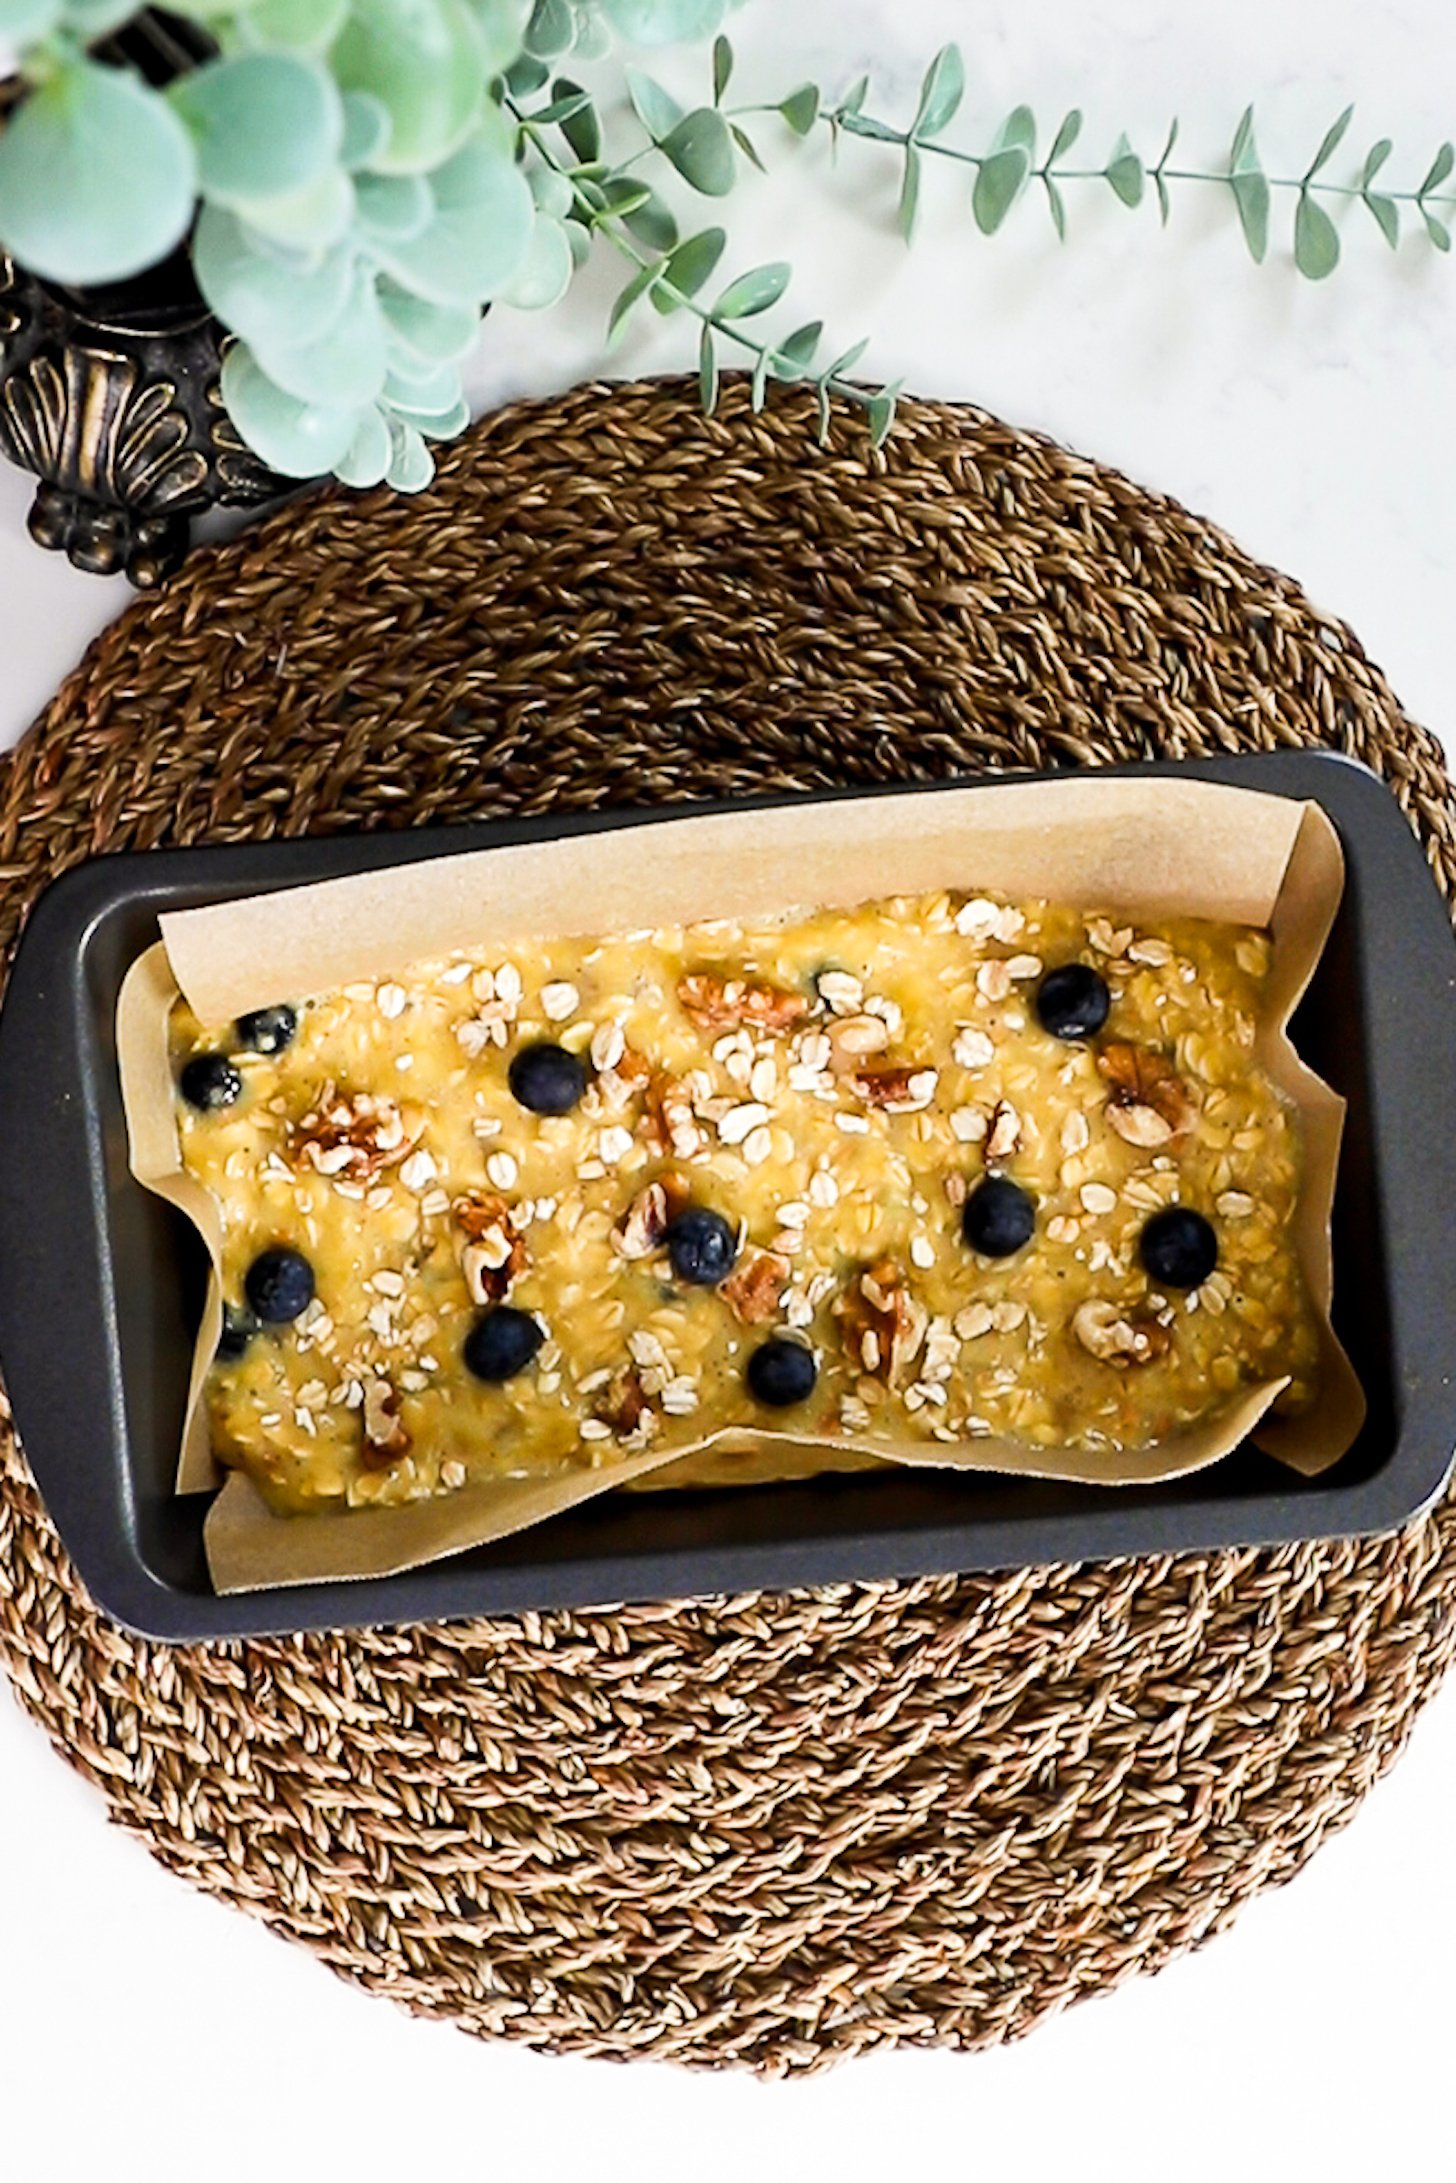 Loaf pan filled with wet oat mixture topped with blueberries and walnuts.